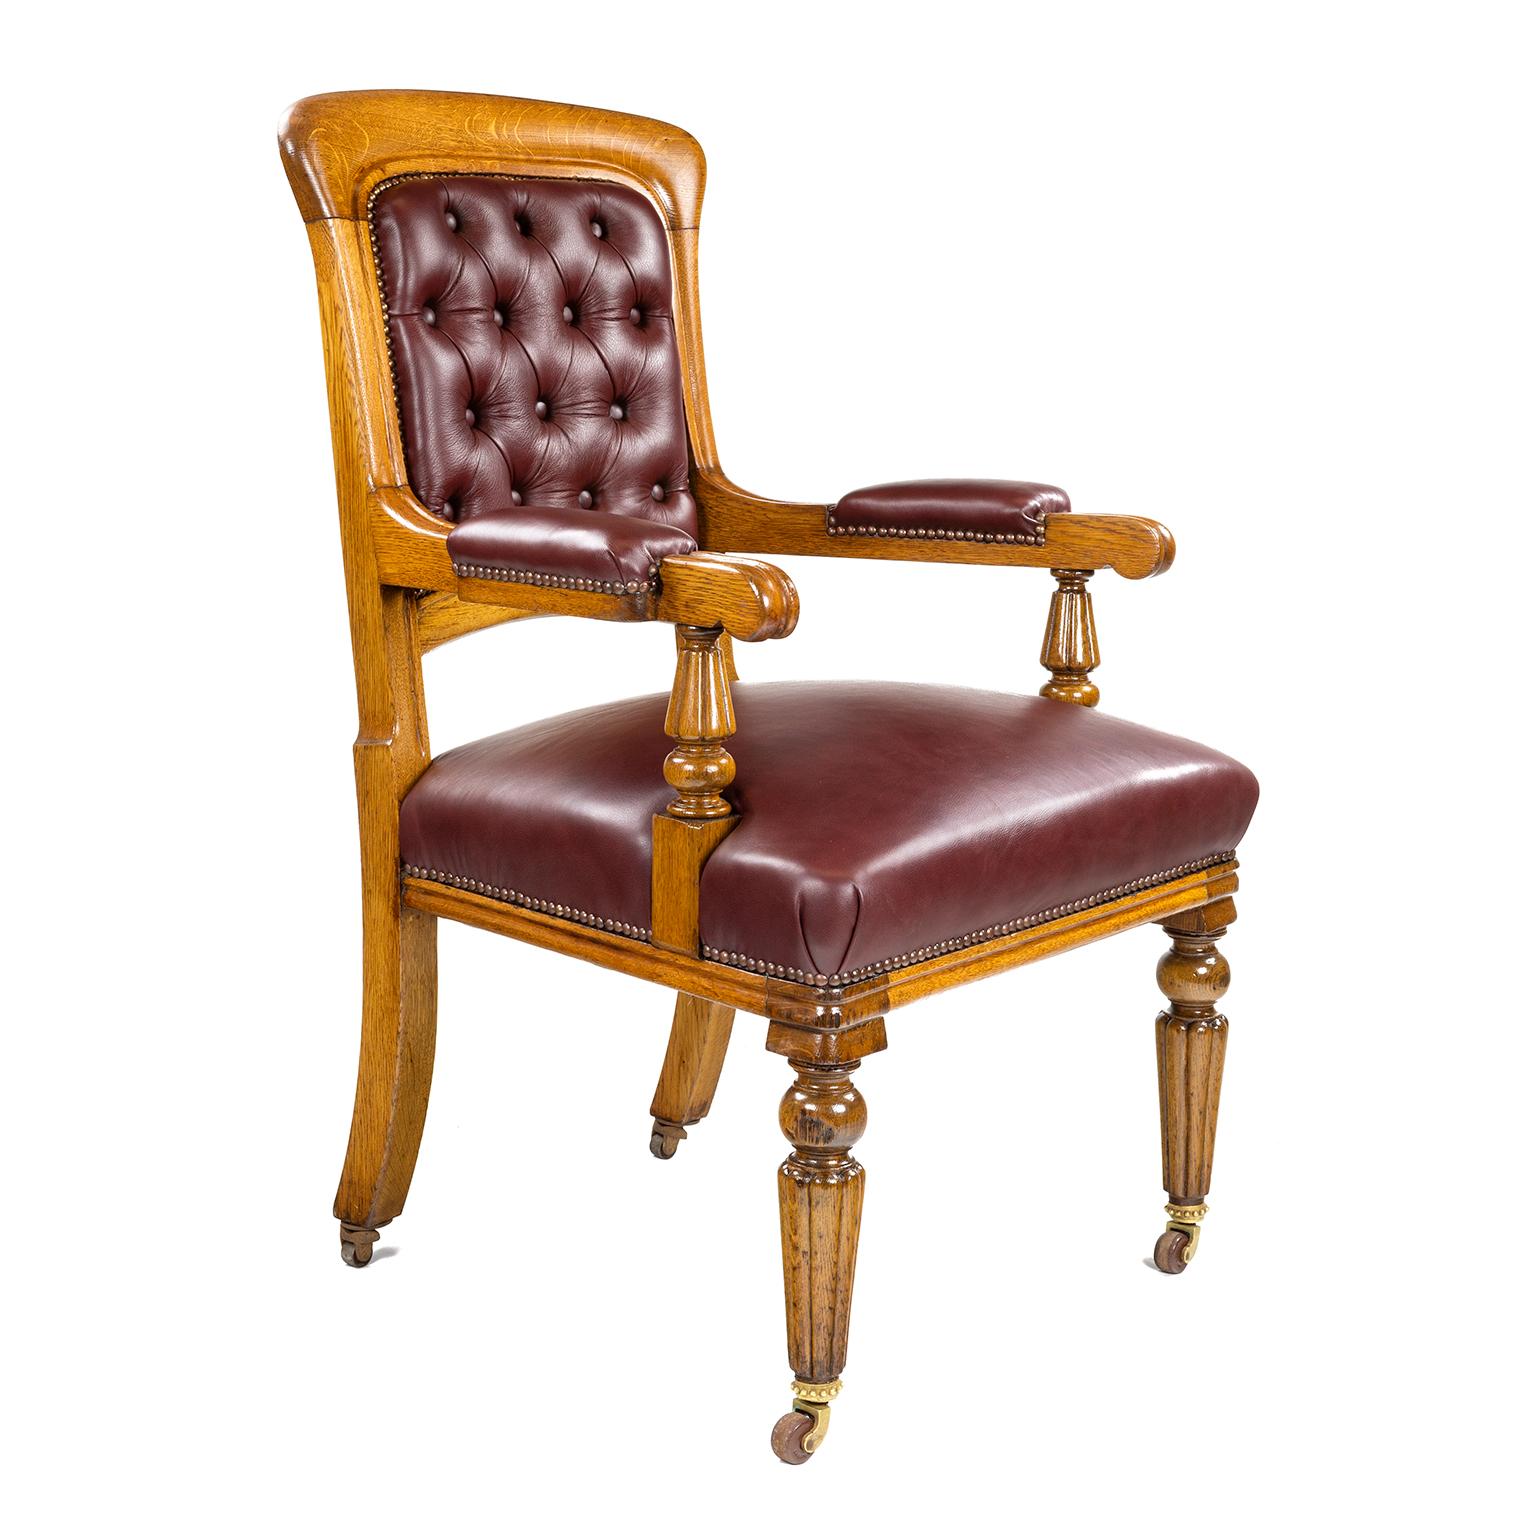 Gillows oak town hall or ceremonial chair in maroon leather. This style of chair has been popular for over one hundred and fifty years.

Gillows of Lancaster and London, also known as Gillow & Co., was an English furniture making firm based in